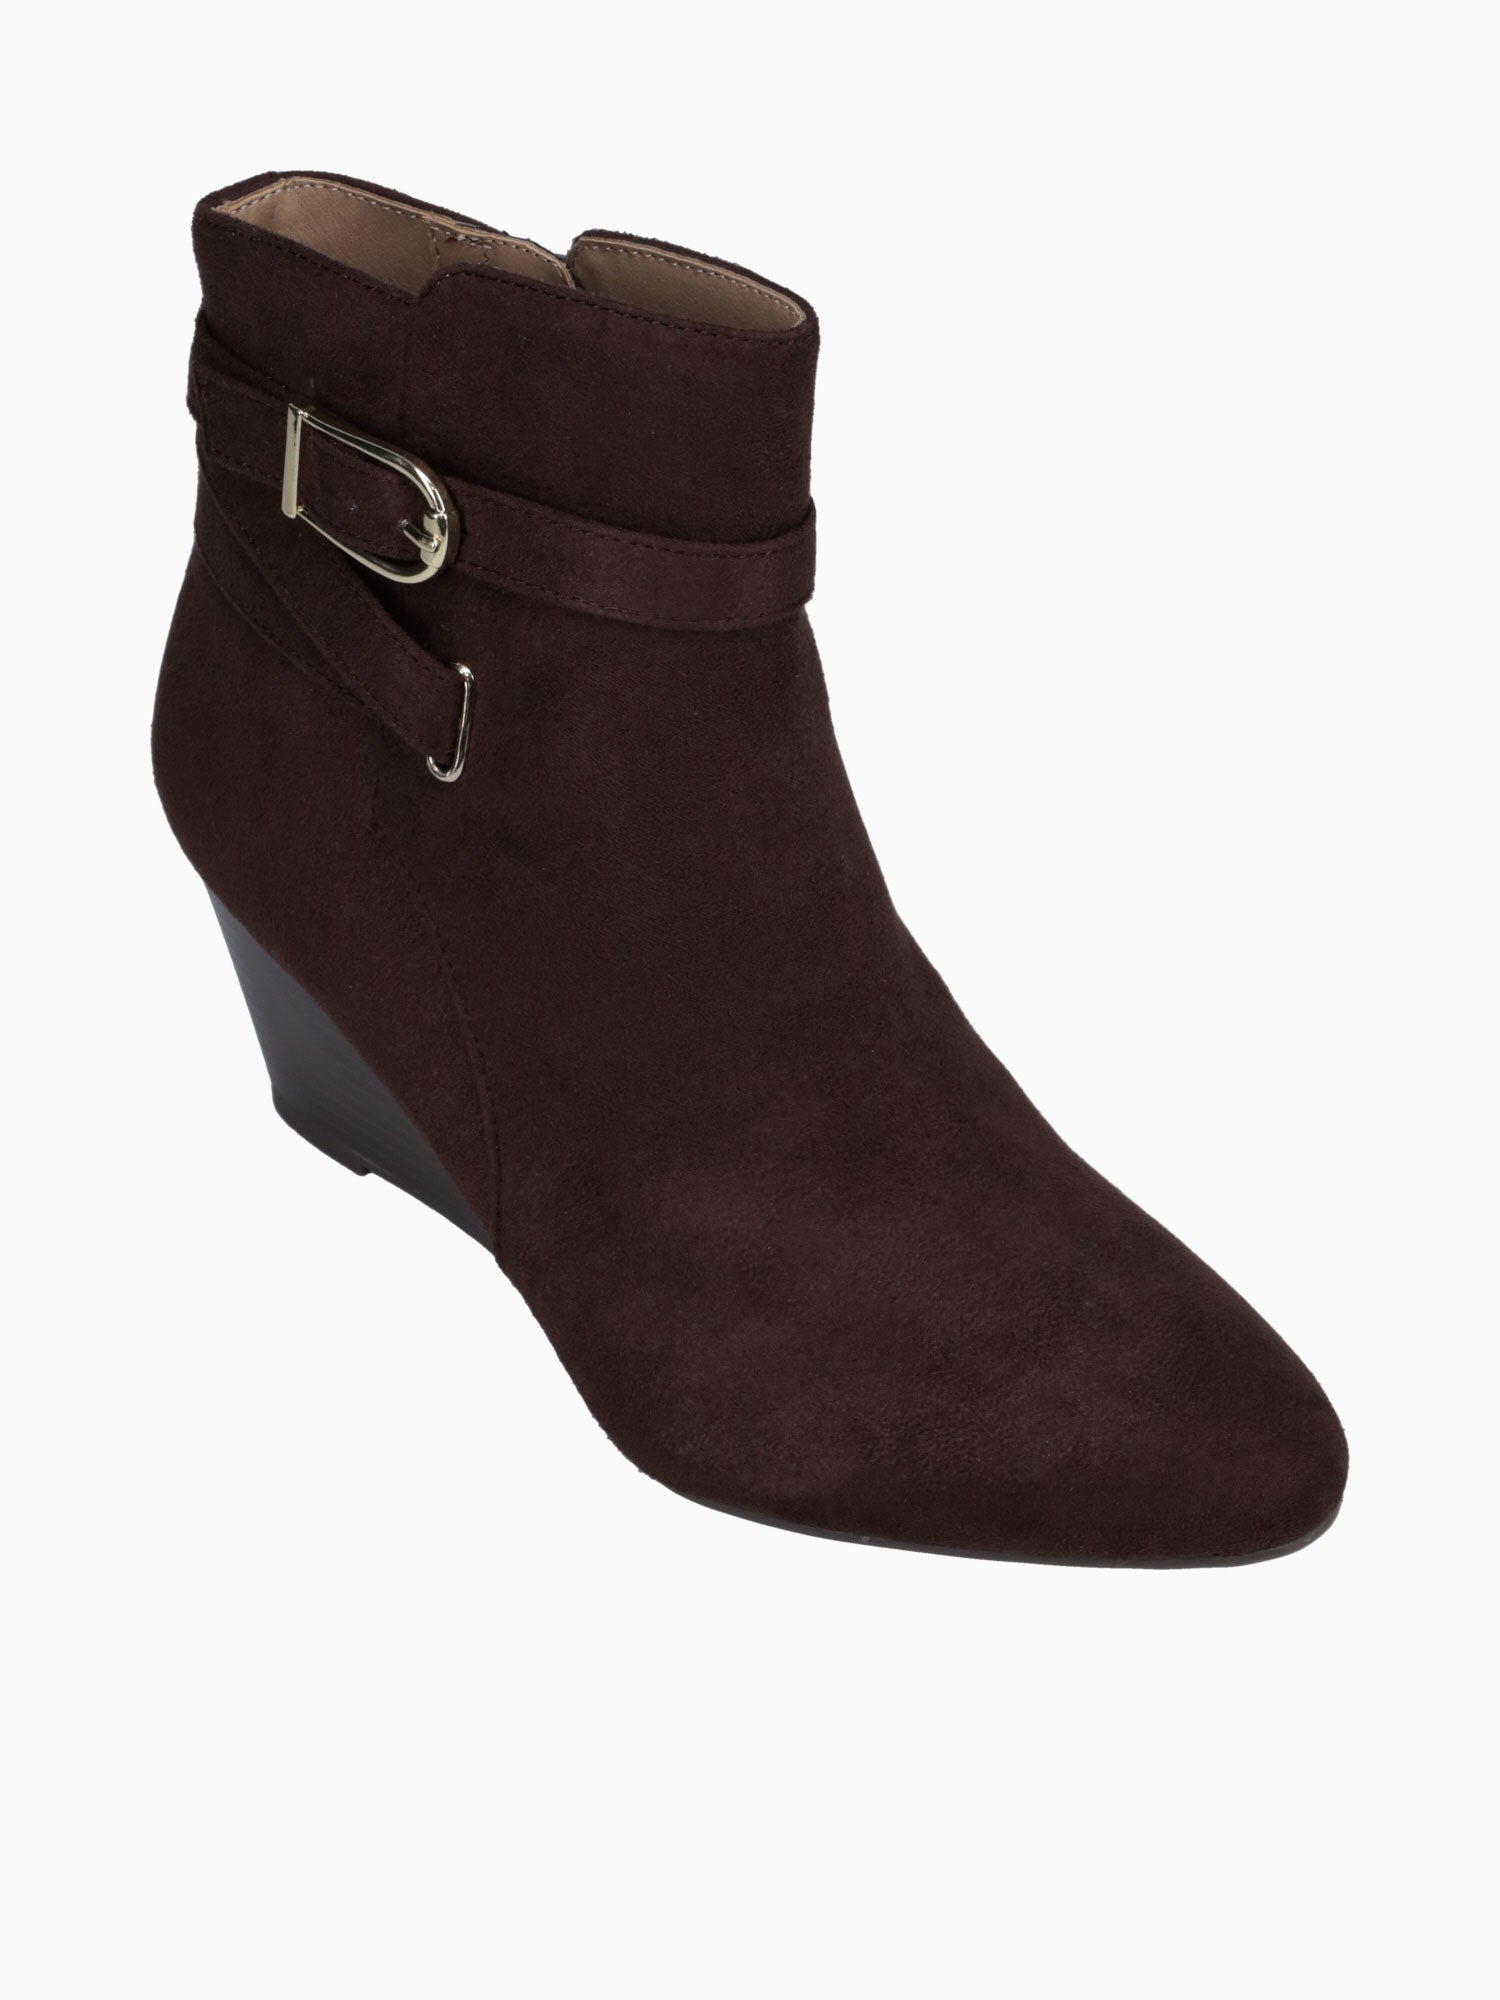 Gio Boot Chocolate Suede Brown / 5 / M